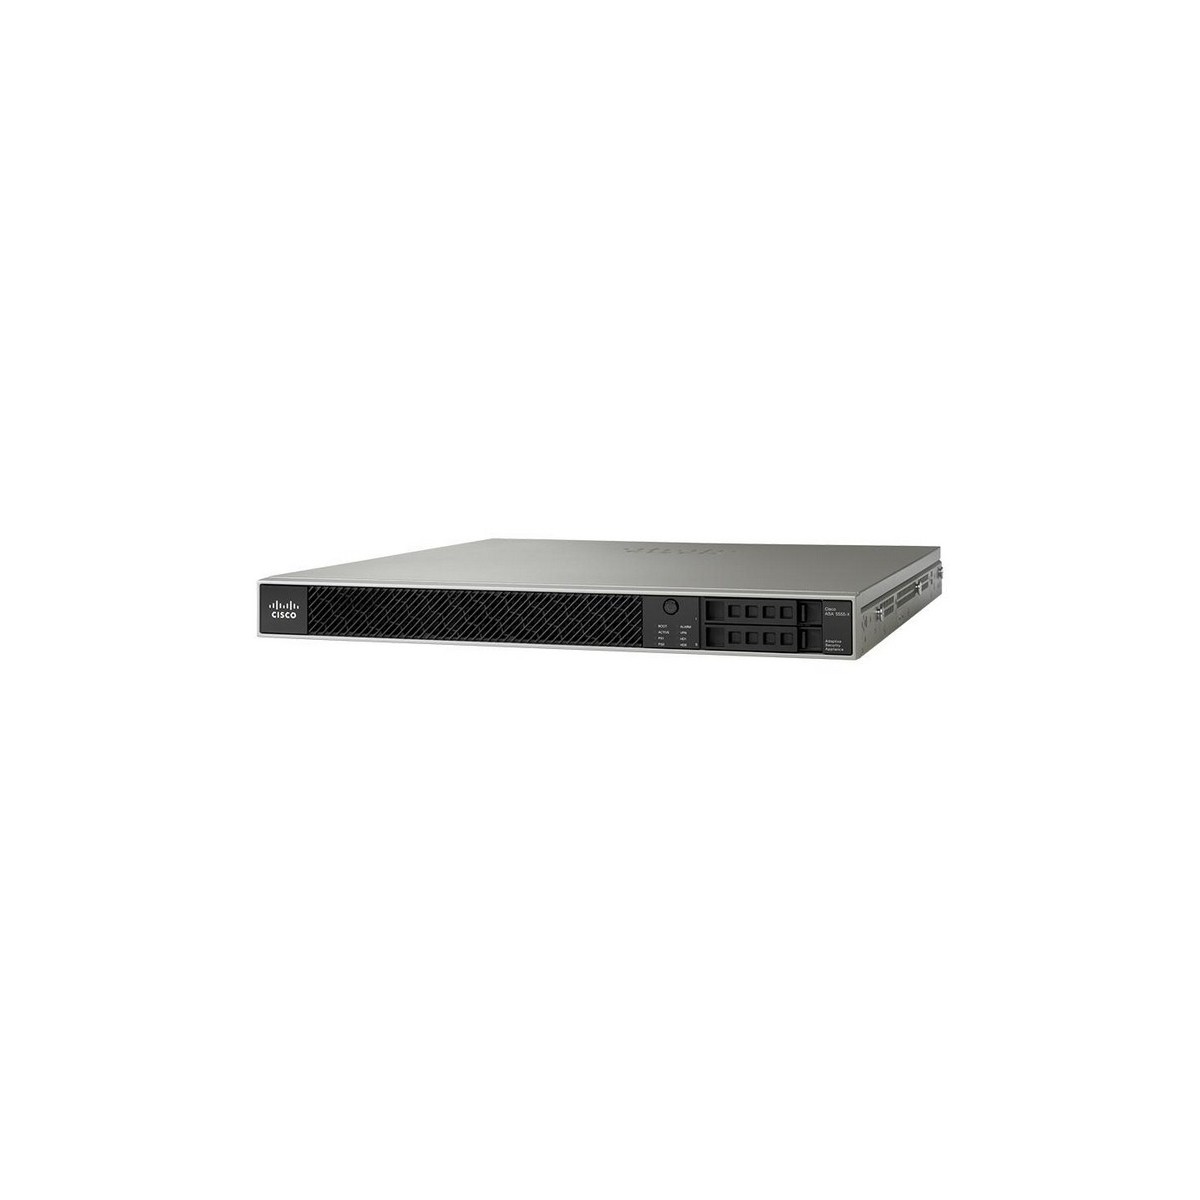 Cisco ASA 5555-X with SW 8GE Data - Firewall - 4,000 Mbps